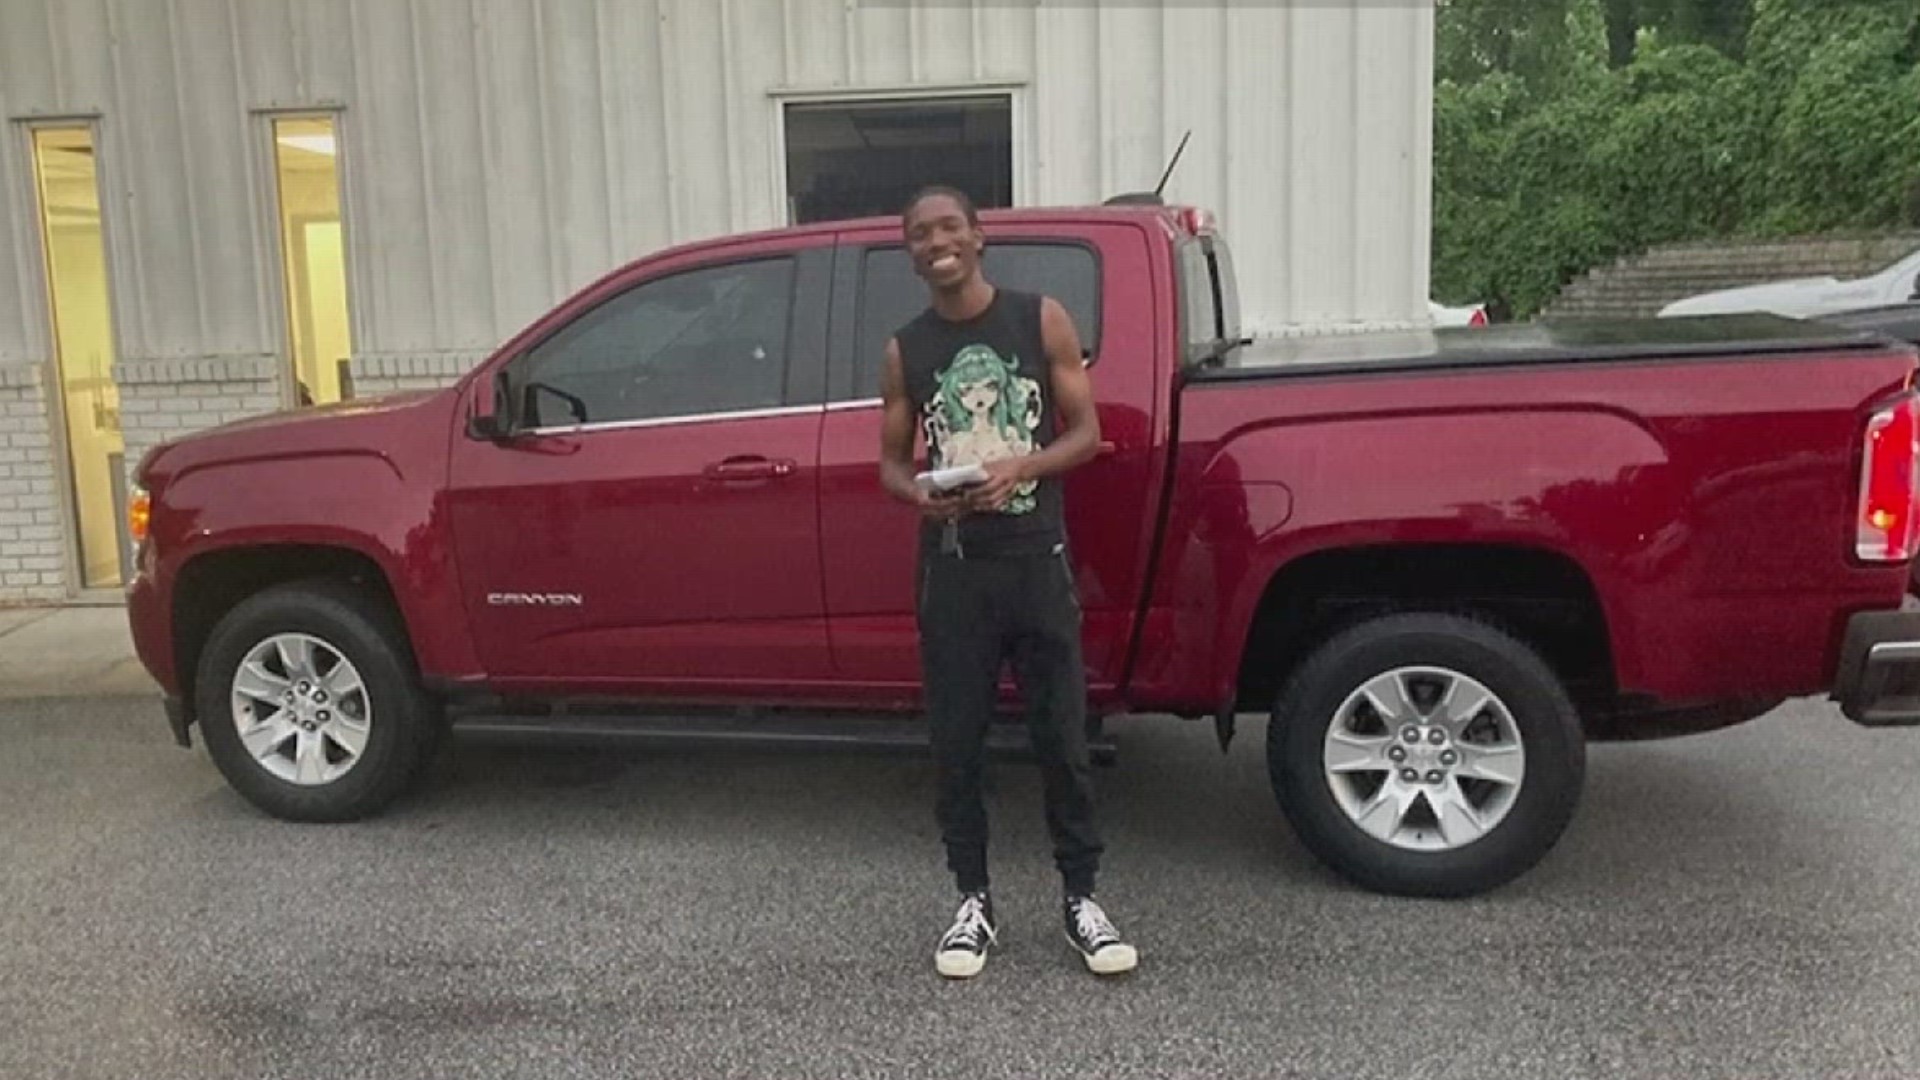 Leondre Flynt disappeared on July 29 around 10:45 a.m. after he left his Loganville home.